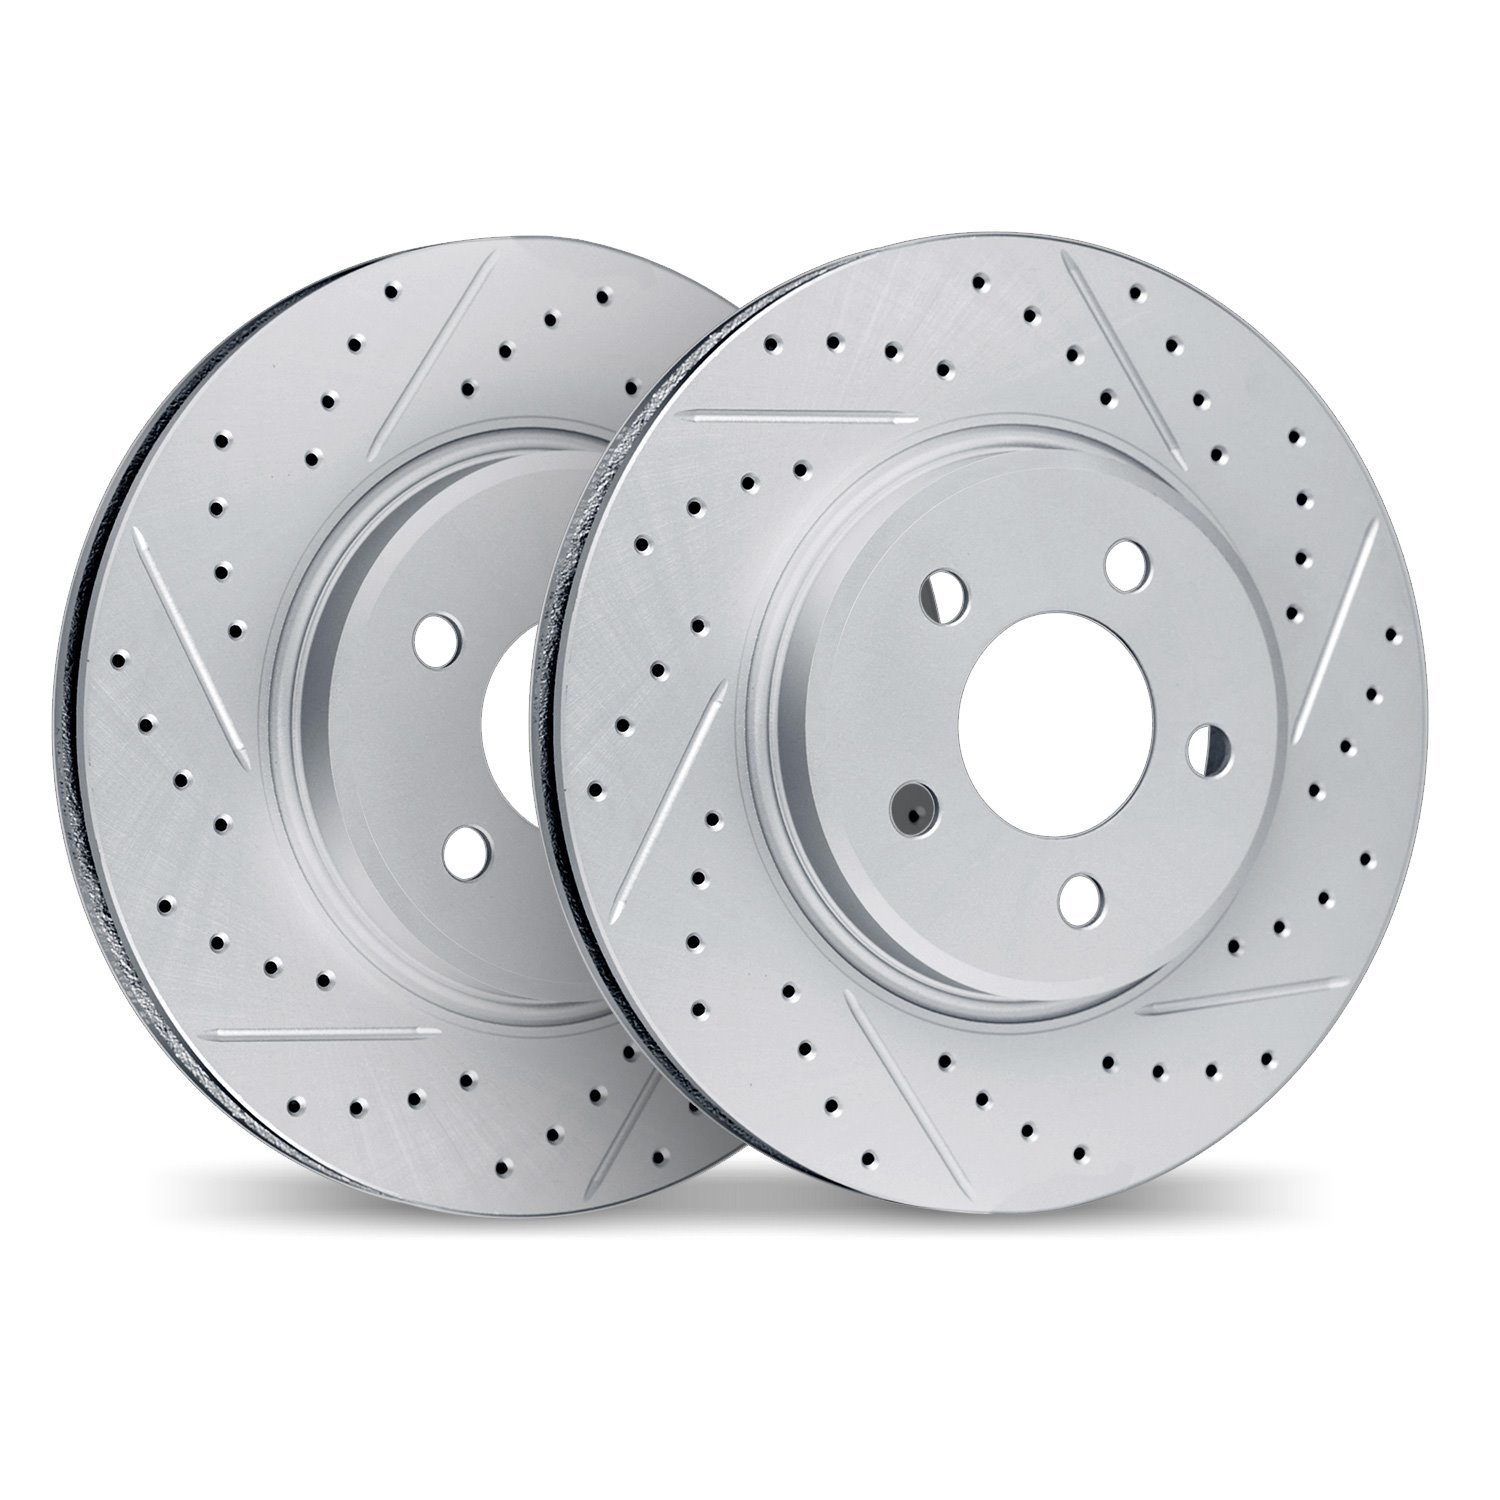 2002-65014 Geoperformance Drilled/Slotted Brake Rotors, 2002-2010 GM, Position: Rear